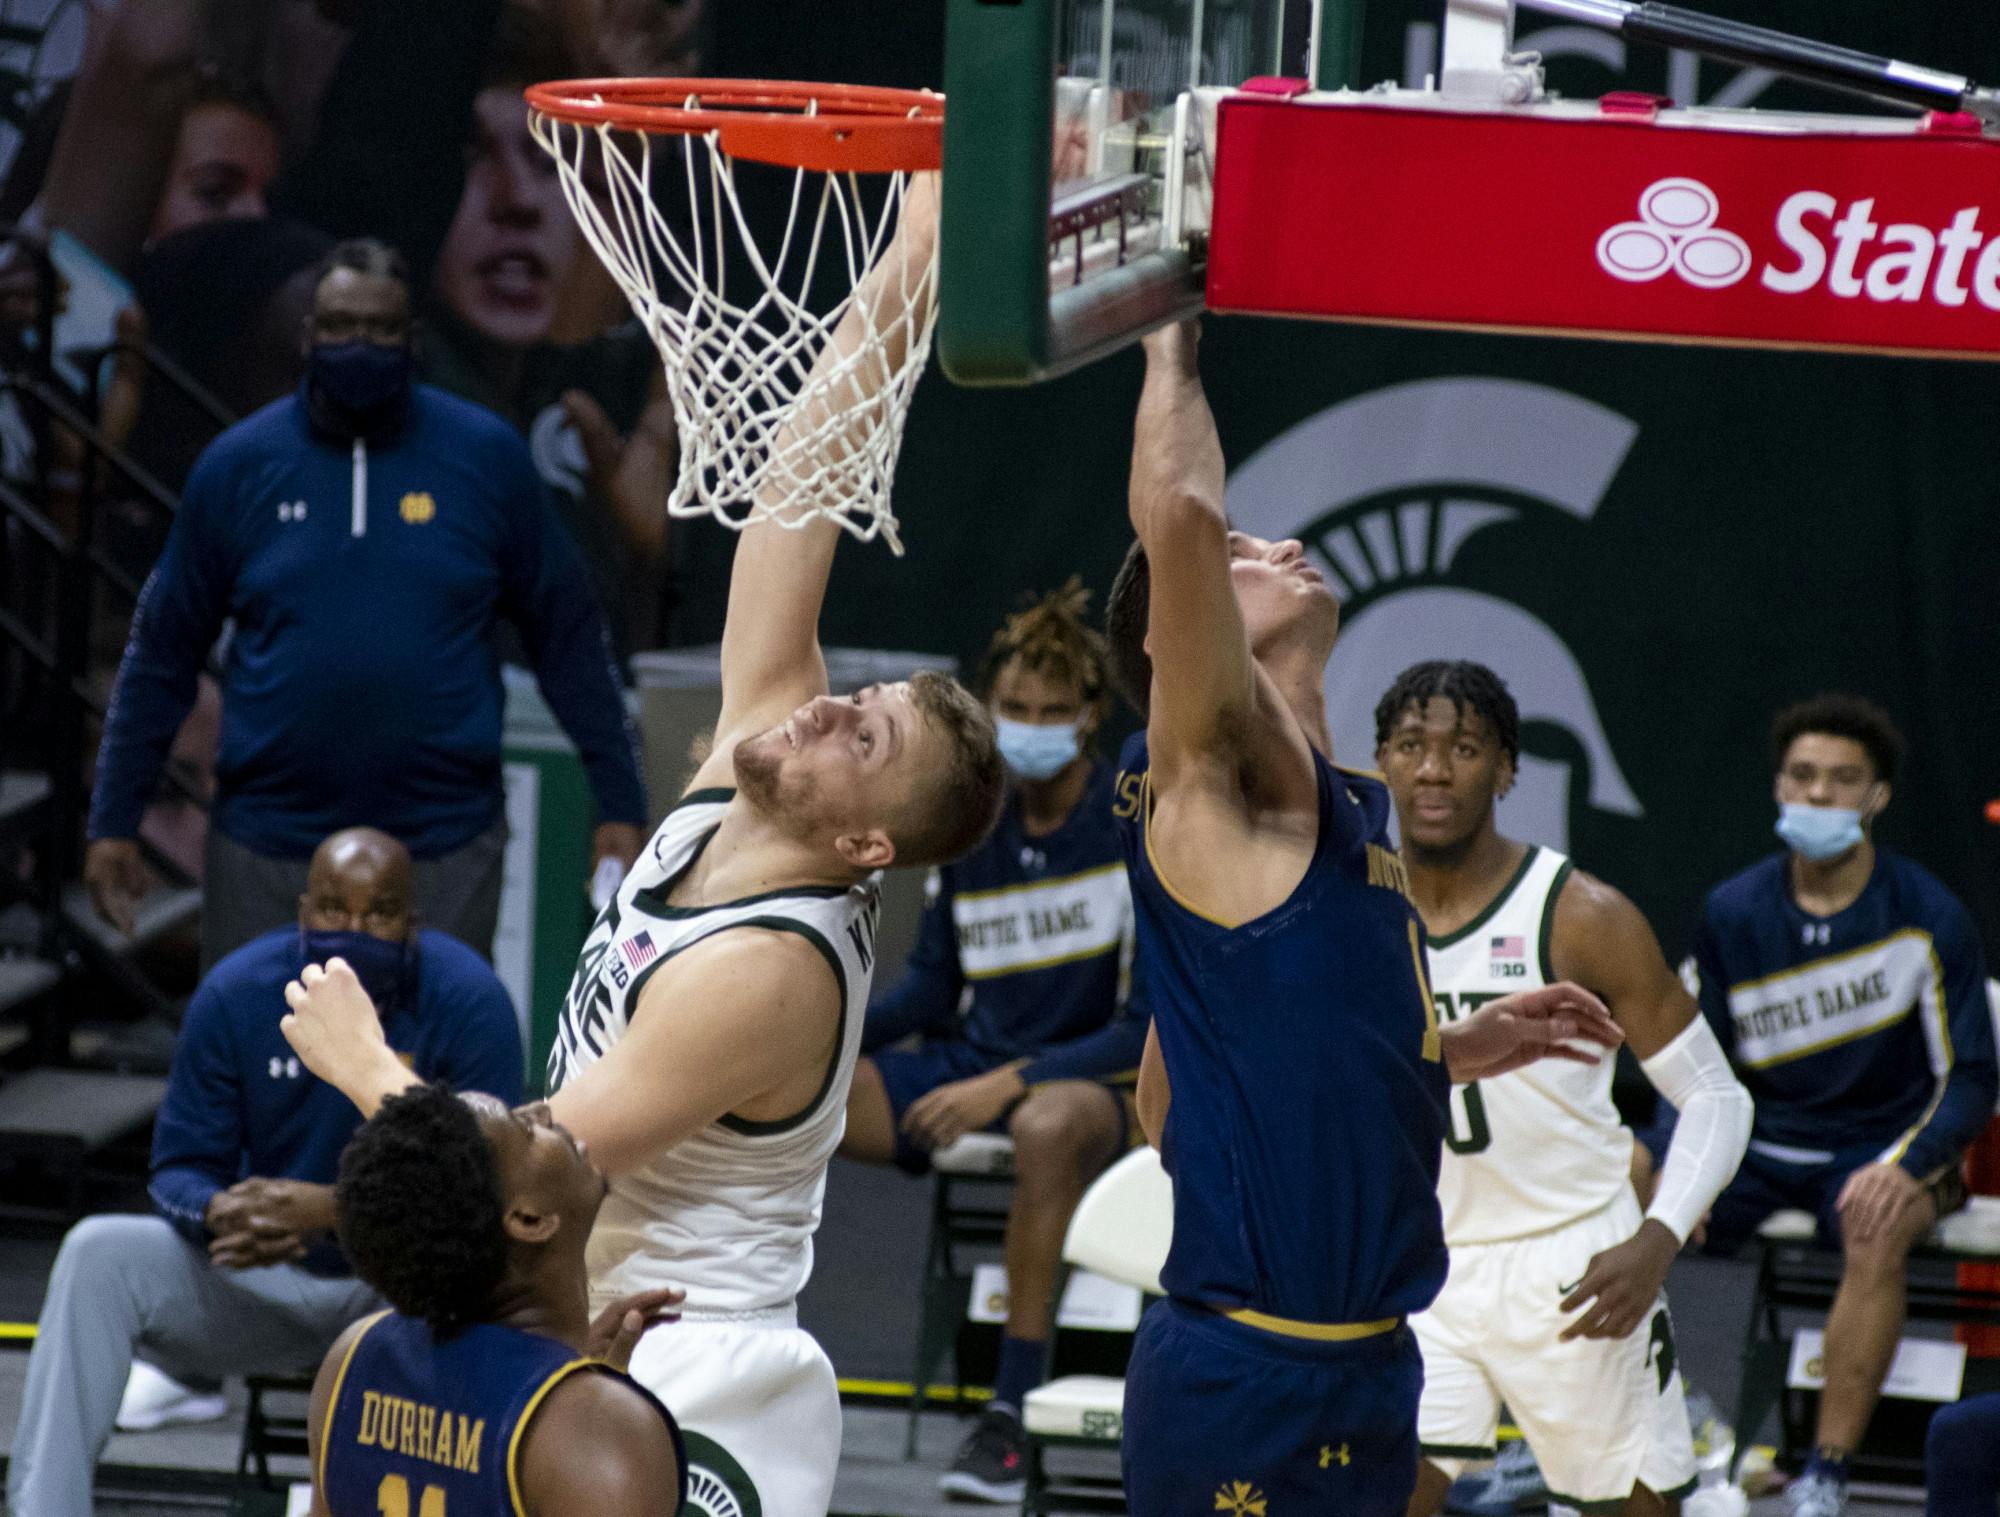 <p>Junior forward Thomas Kithier (15) scores for Michigan State in the first half of the game. Michigan State triumphed over Notre Dame, 80-70, on Nov. 28, 2020. </p>